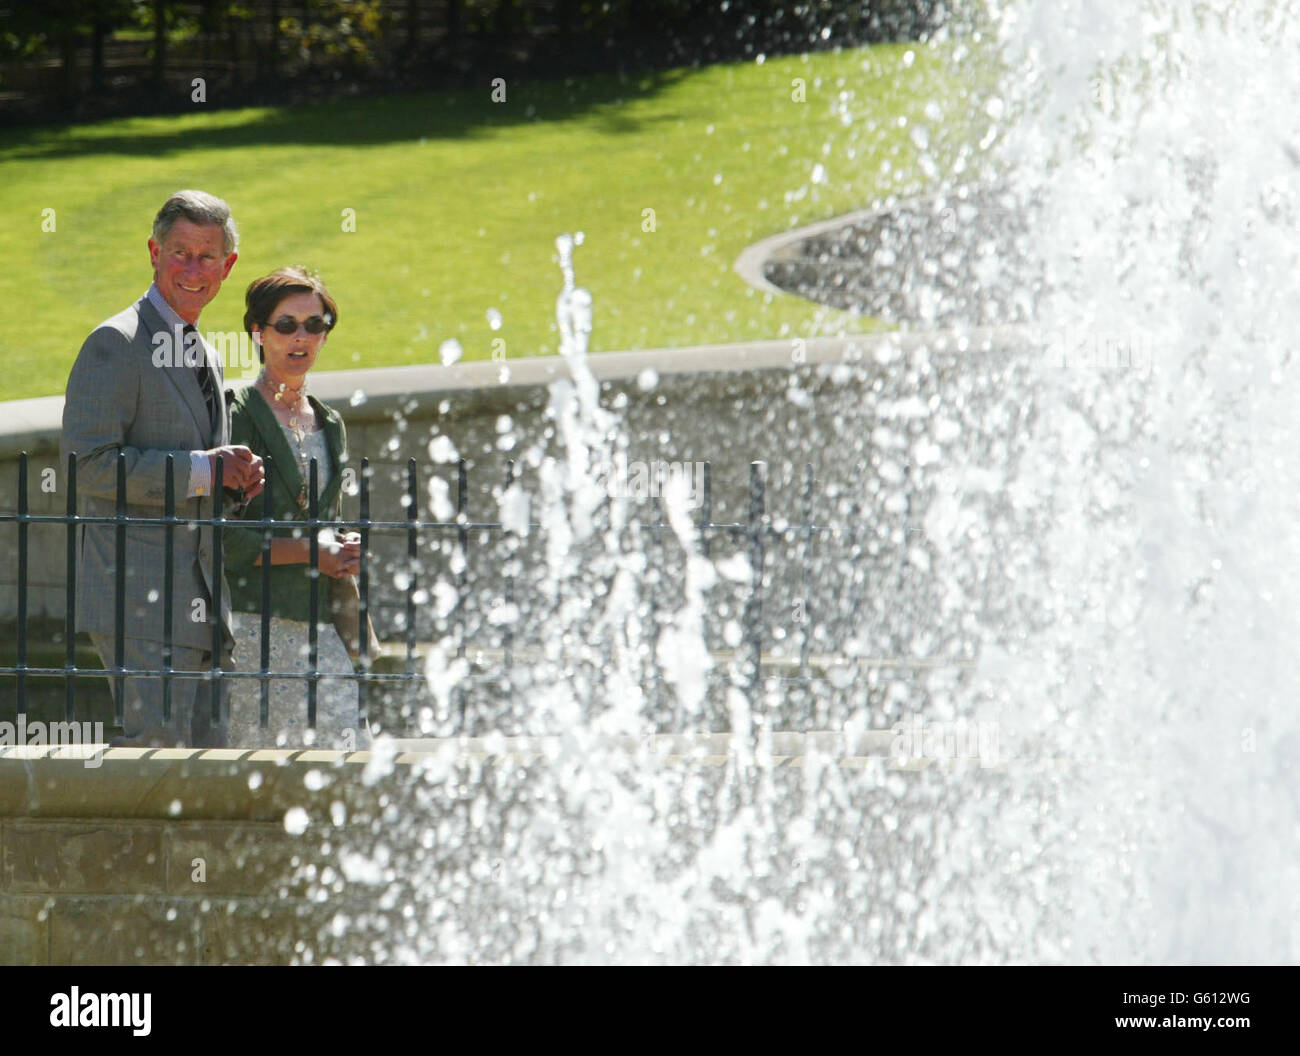 The Prince of Wales walks through Alnwick Gardens with the Duchess of Northumberland after he opened the historic walled garden in the grounds of her estate as part of a seven-year 14milliom project she is planning to restore the property to its former glory. * A central feature of the garden is a huge cascade of water, complete with fountains, which are believed to be the largest of its kind in this country. It took 150,000 man hours to complete and 7,260 gallons of water tumble down its 30 weirs every minute. Since the garden opened to the public in October last year almost 250,000 visitors Stock Photo